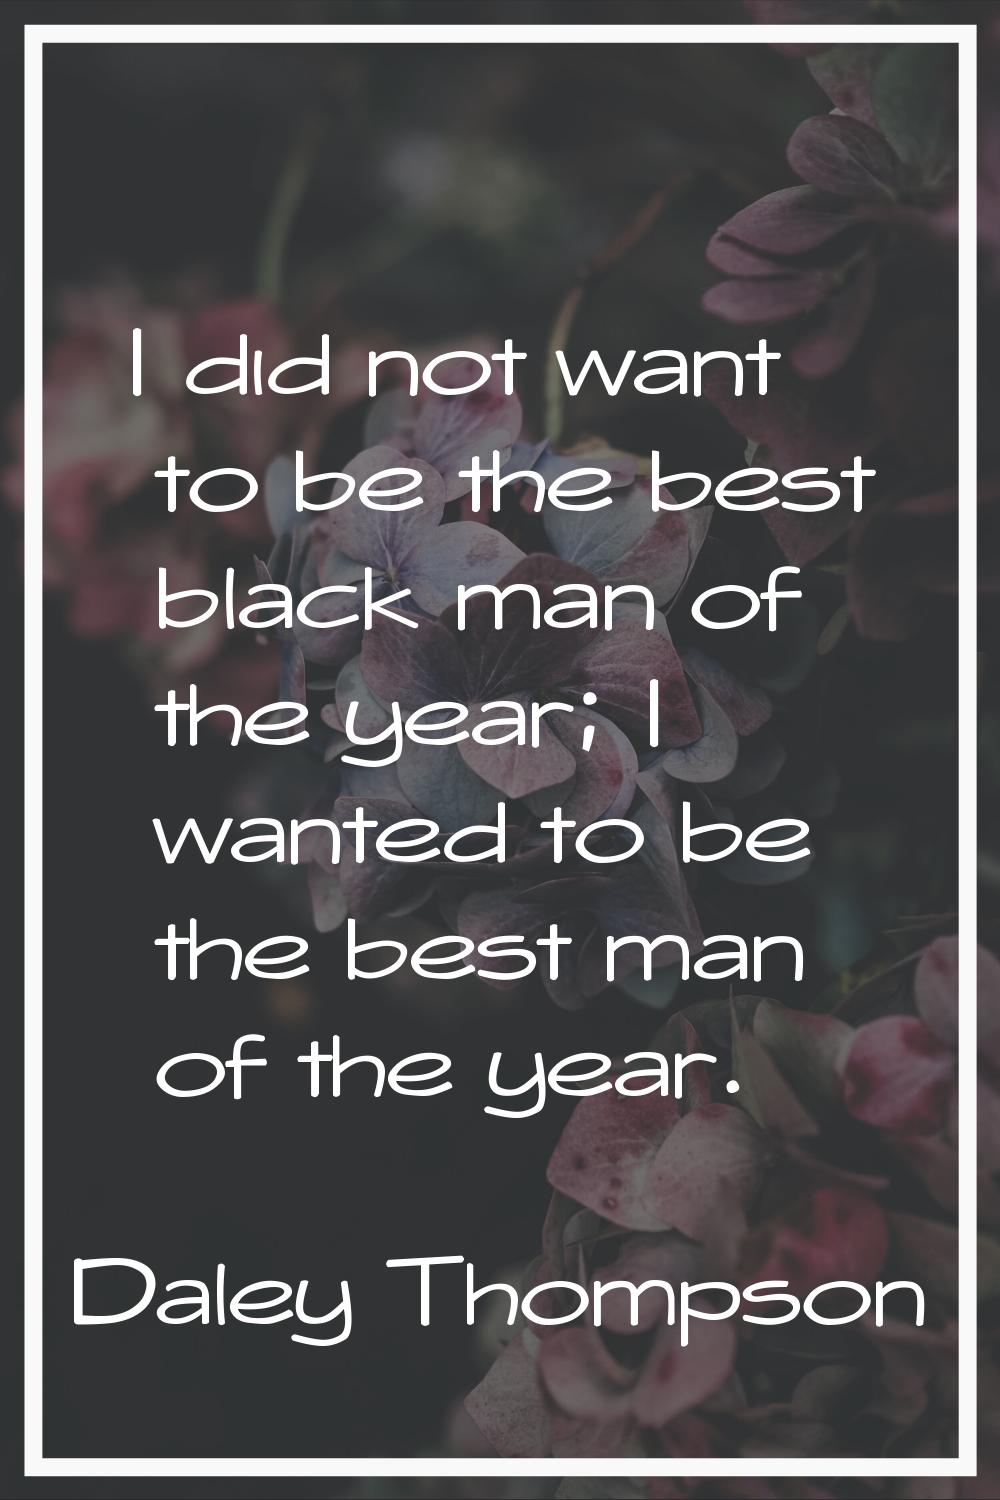 I did not want to be the best black man of the year; I wanted to be the best man of the year.